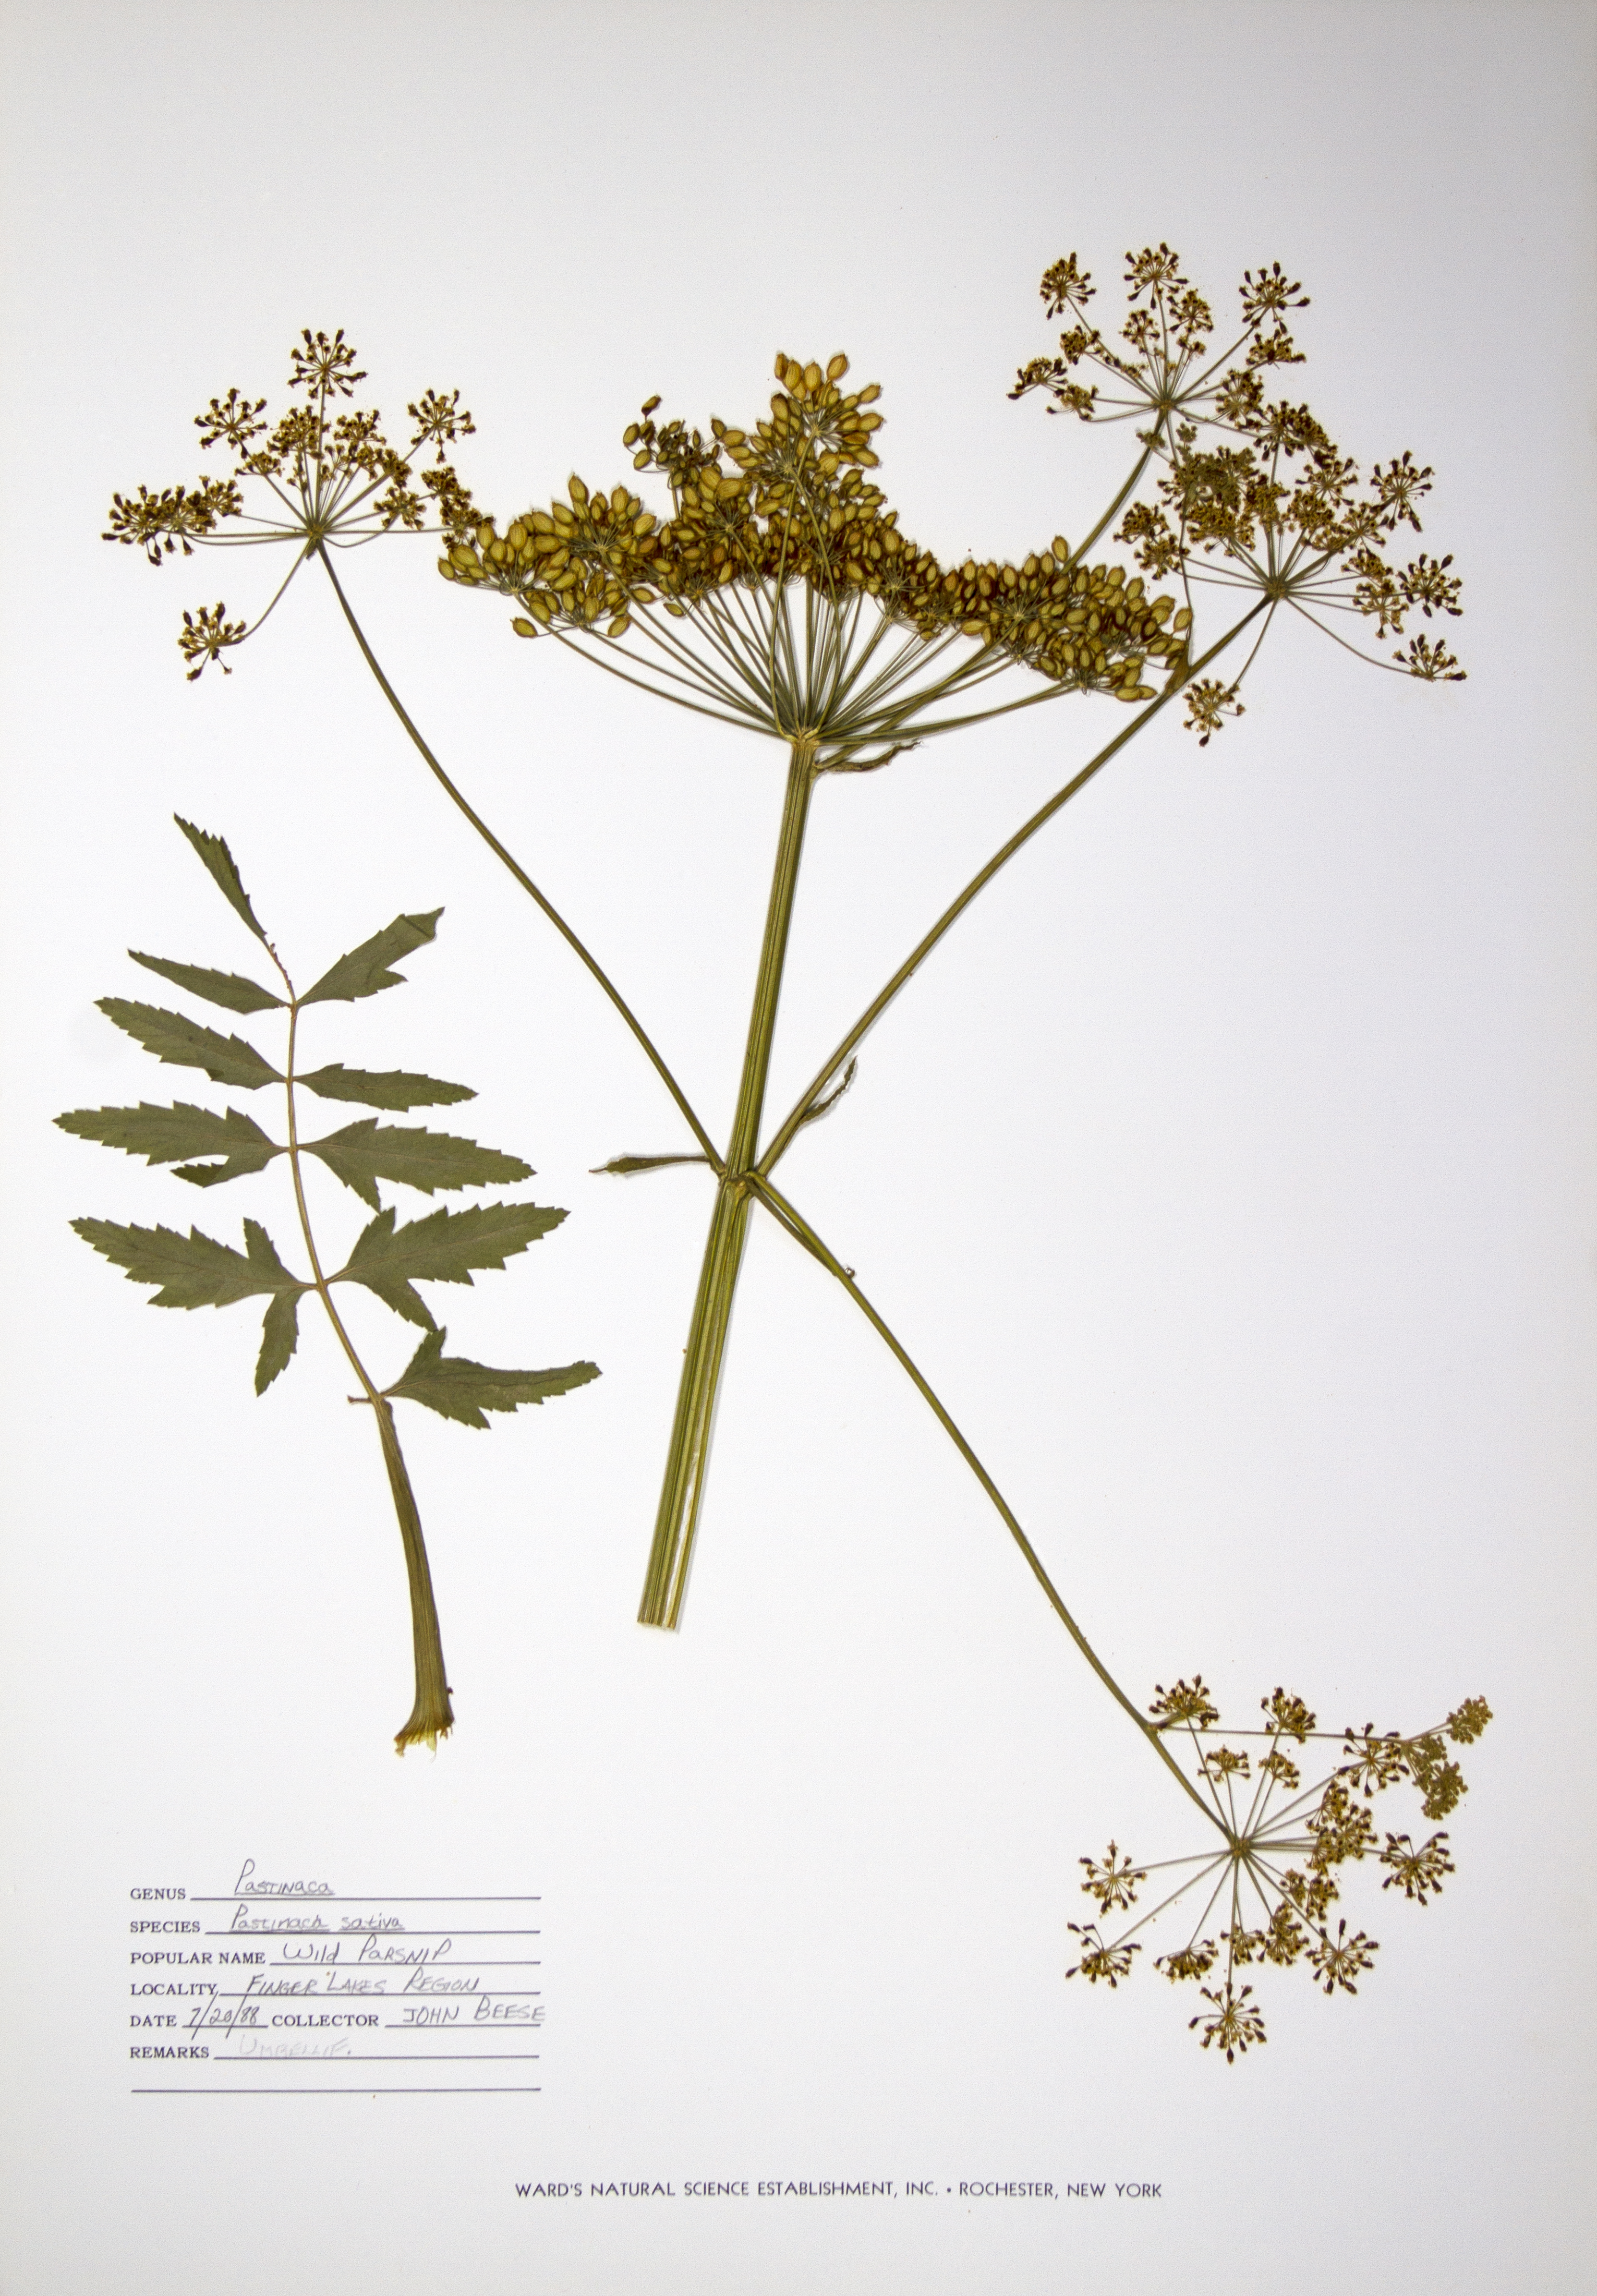 Wild parsnip Finger Lakes Region - July 20, 1988 Collected by John Beese